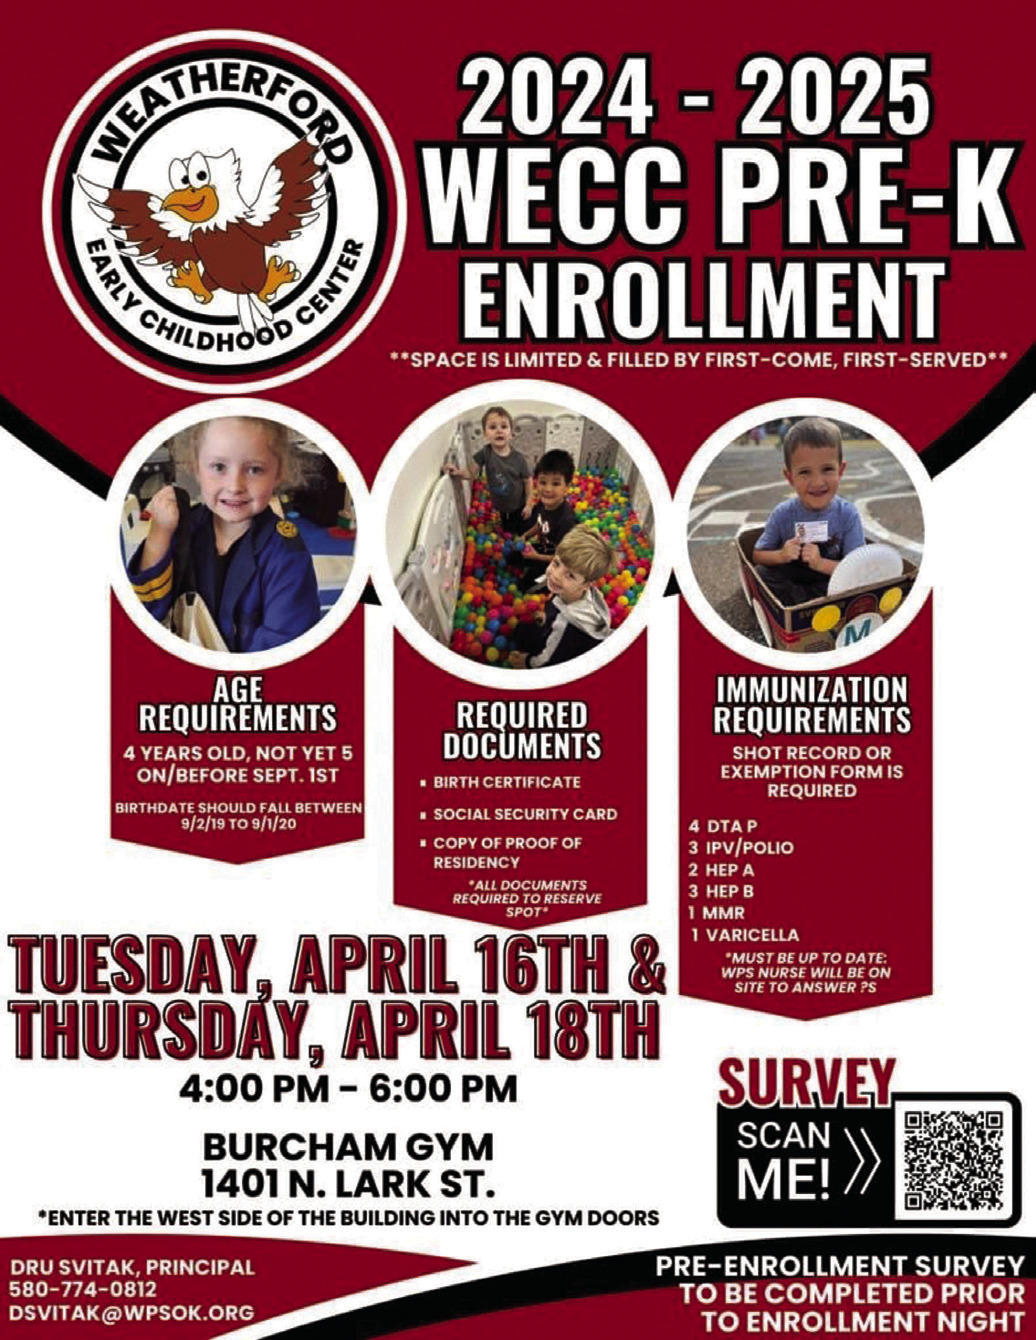 Pre-k enrollment for 2024-25 will be 4-6 p.m. April 16 and April 18 on the west side of the Burcham Elementary Gym, 1401 N. Lark St.  A pre-enrollment survey needs to be completed prior to enrollment night.  Weatherford Early Childhood Center will be at the old West Elementary building.  The WECC will have students in Pre-k, which is 3 and 4 year olds. Dru Svitak will be the new principal.